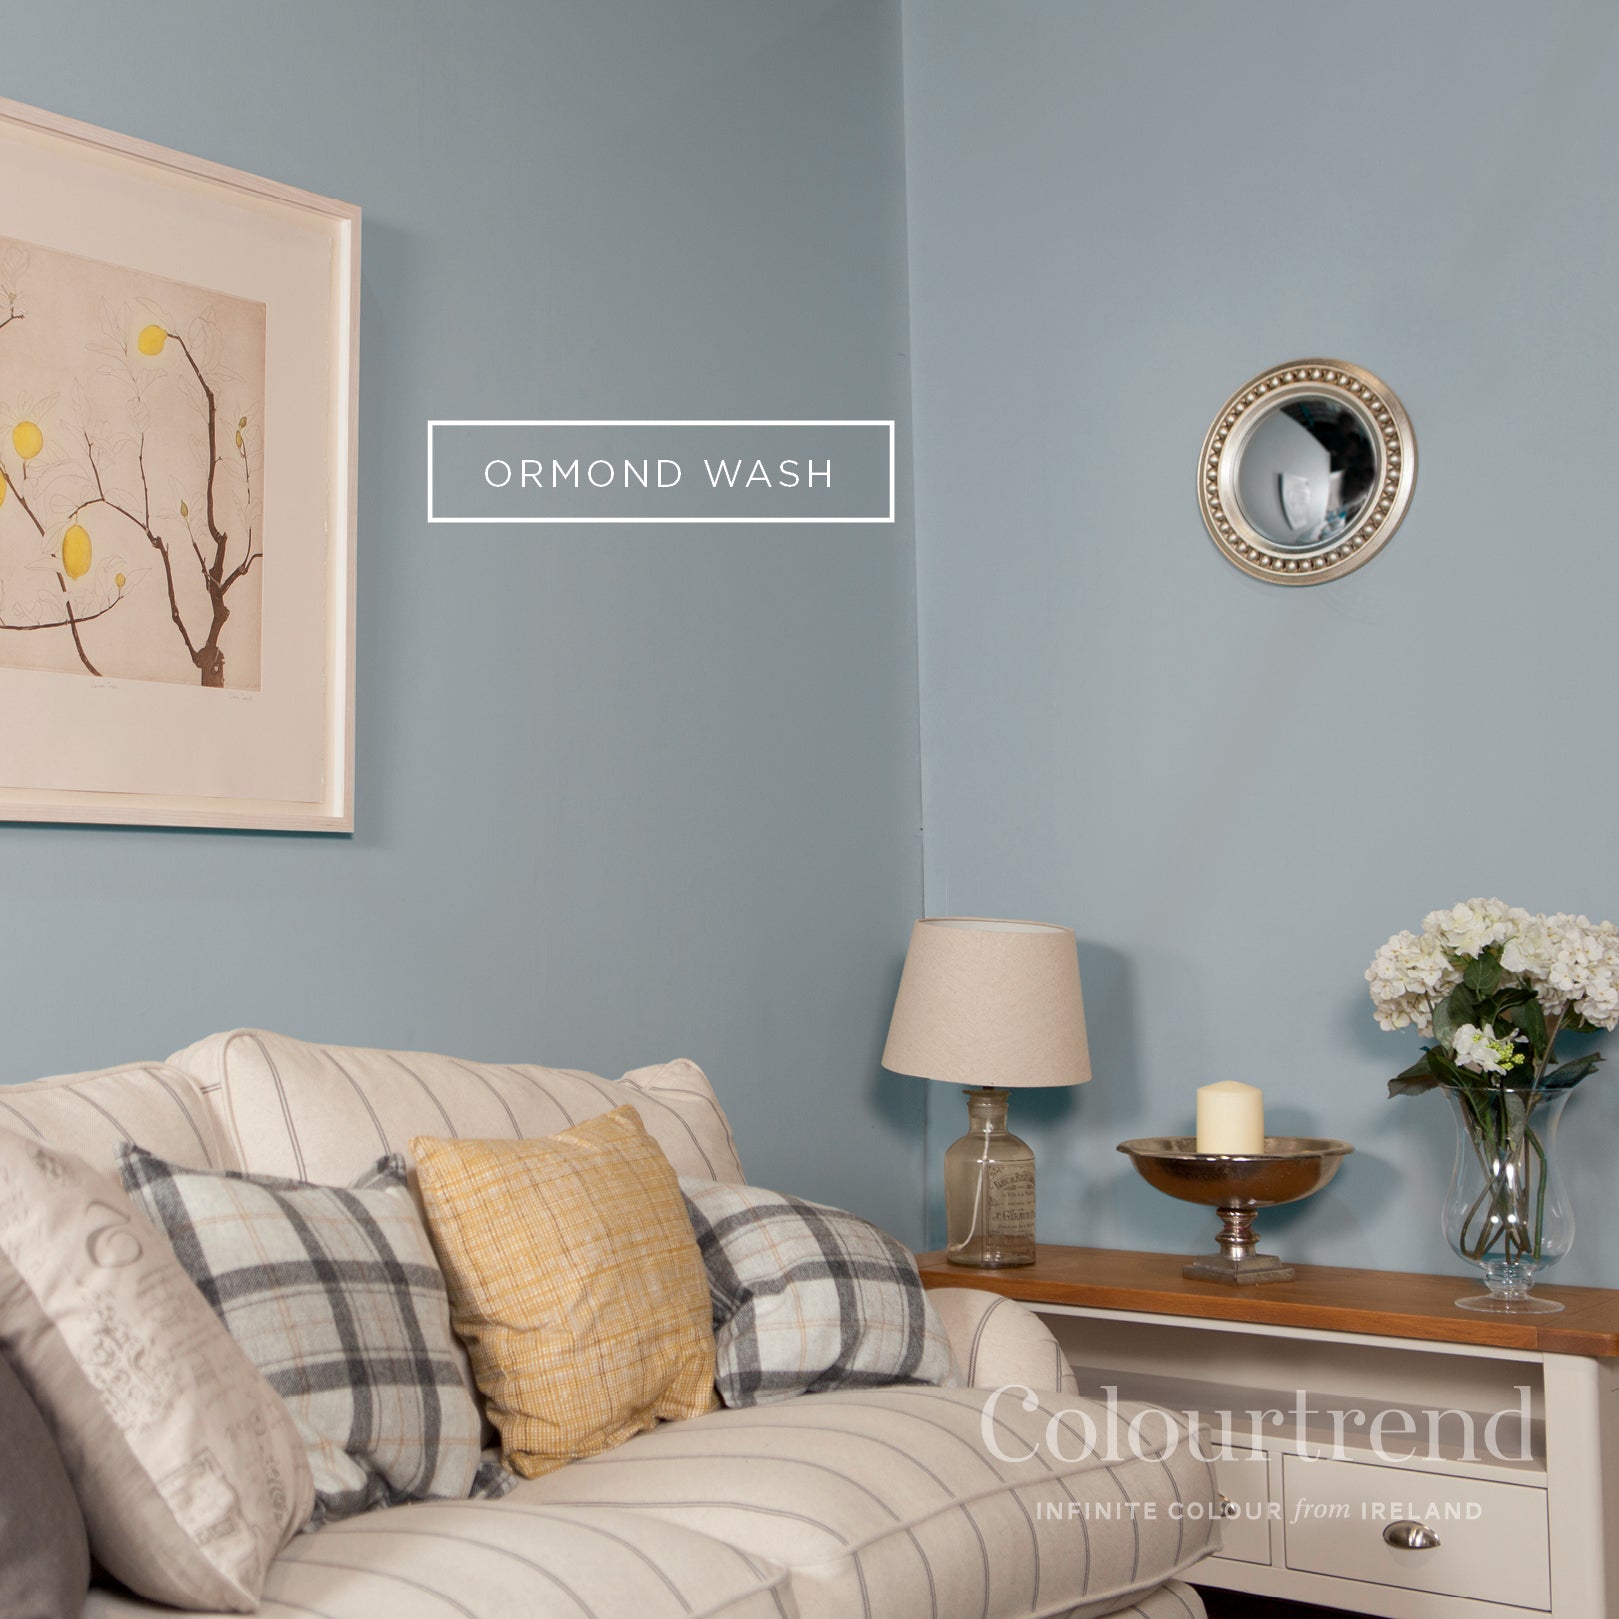 Colourtrend Ormond Wash | Same Day Dublin and Nationwide Paint in Ireland Delivery by Weirs of Baggot Street - Official Colourtrend Stockist